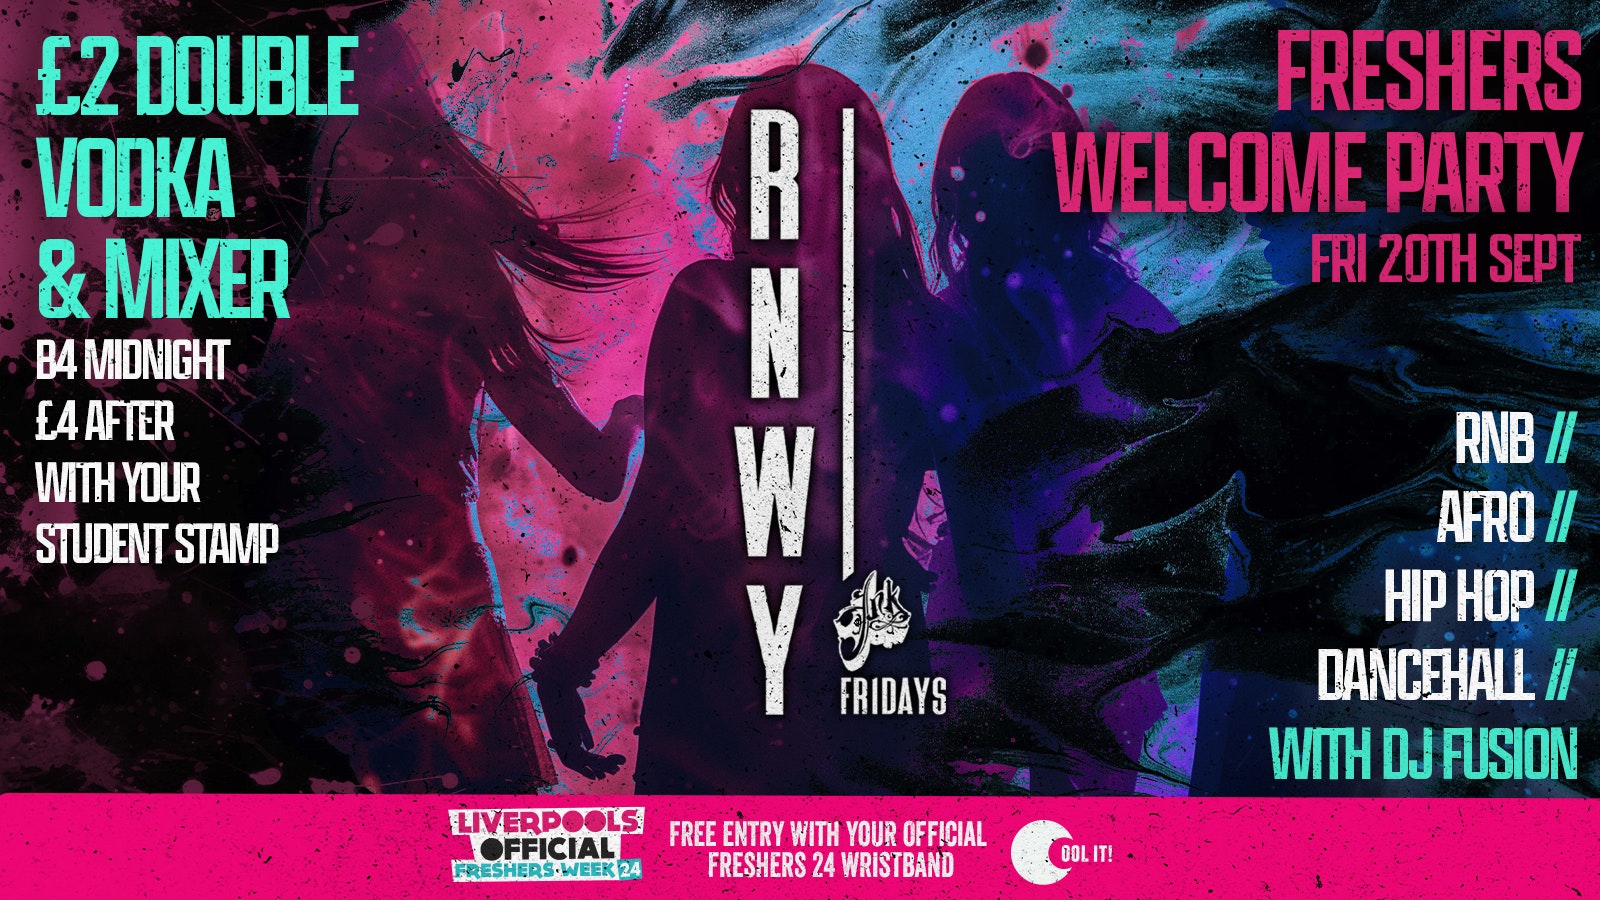 DAY 6 – OFFICIAL EVENT 1 – RUNWAY Fridays @ INK – Liverpool’s Best Friday Night Party